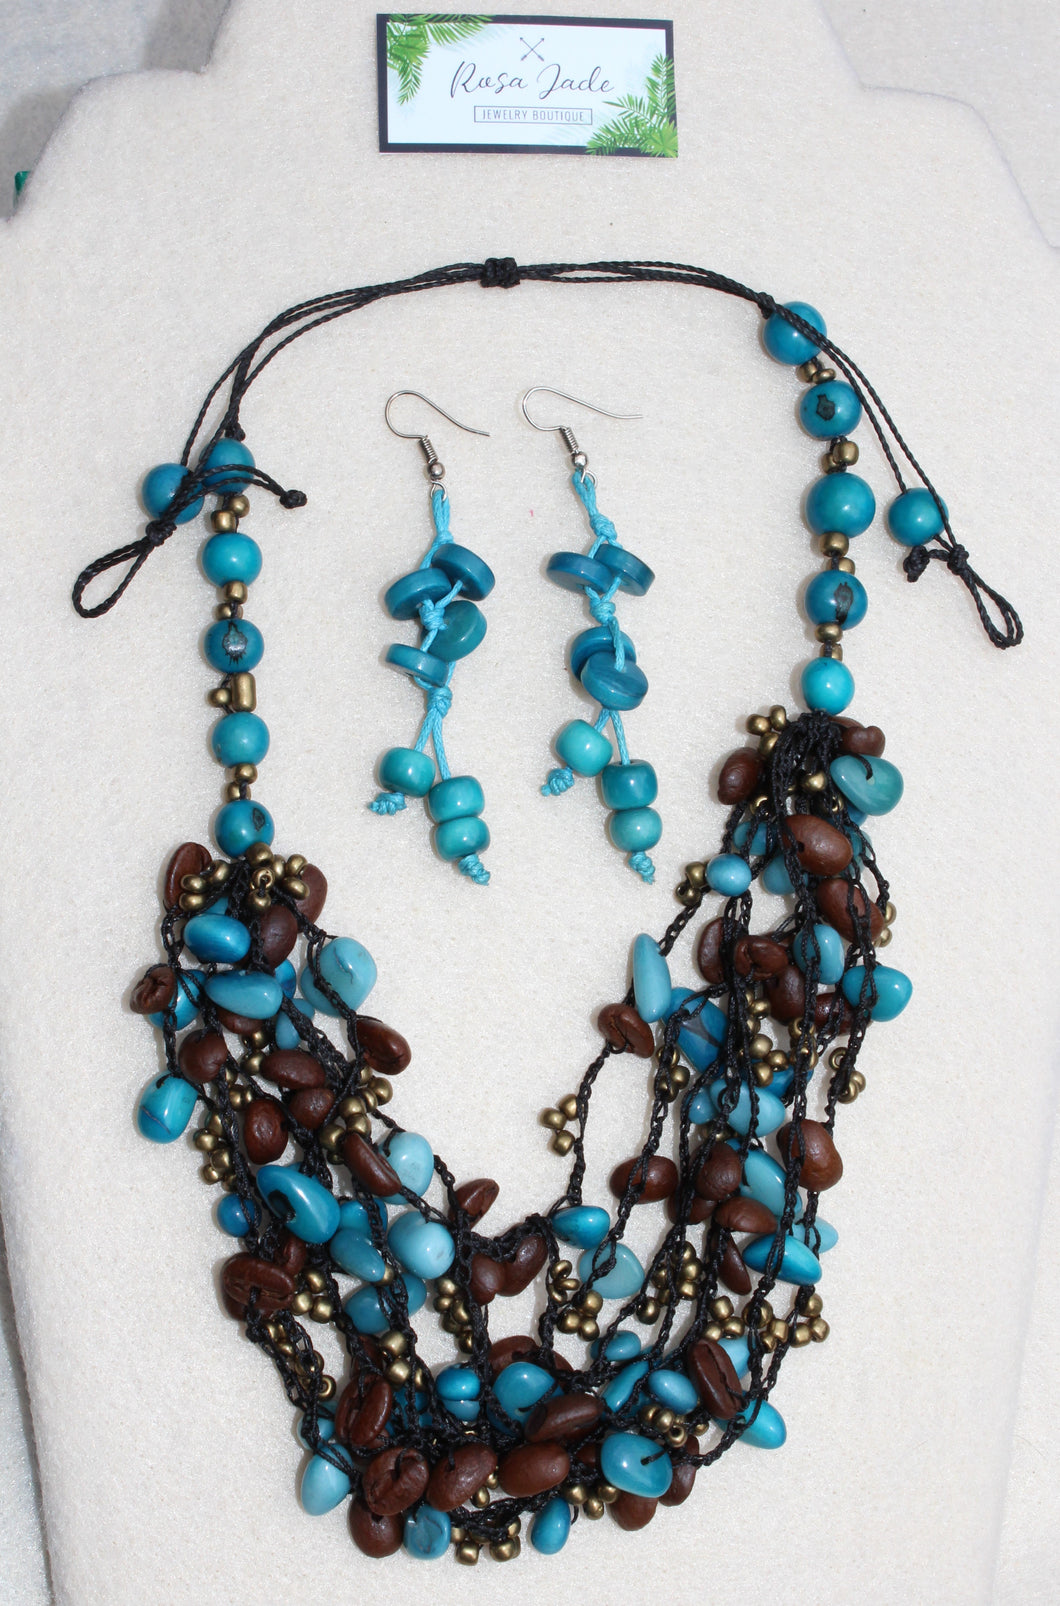 Turquoise Tagua Nut and Coffee Beans Necklace and Earrings set